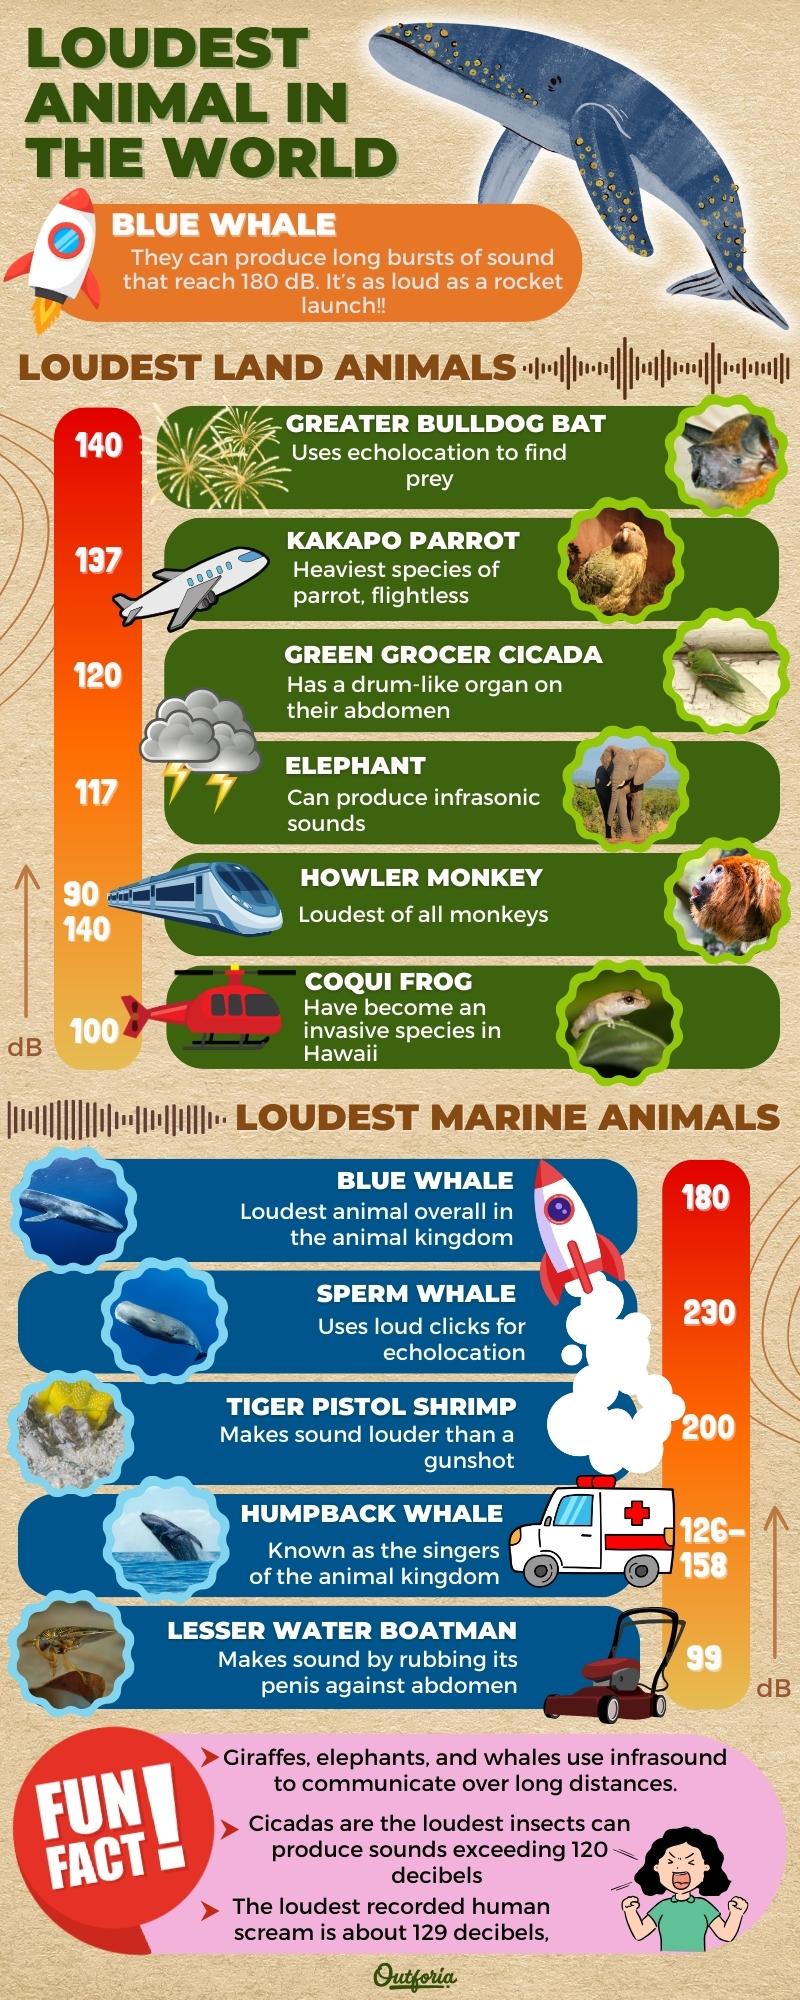 Infographic showcasing the loudest animals in the world. The blue whale is depicted as the loudest animal with sounds reaching 180 dB, equivalent to a rocket launch. A list of the loudest land animals includes the greater bulldog bat (140 dB), kakapo parrot (137 dB), green grocer cicada (120 dB), elephant (117 dB), and howler monkey (90 dB). Marine animals featured are the blue whale (180 dB), sperm whale (230 dB), tiger pistol shrimp (200 dB), humpback whale (126-158 dB), and the lesser water boatman (99 dB). Fun facts at the bottom mention that giraffes, elephants, and whales use infrasound for communication, cicadas can produce sounds over 120 dB, and the loudest human scream recorded is about 129 dB. Infographic is decorated with illustrations of each animal and icons representing their loudness.